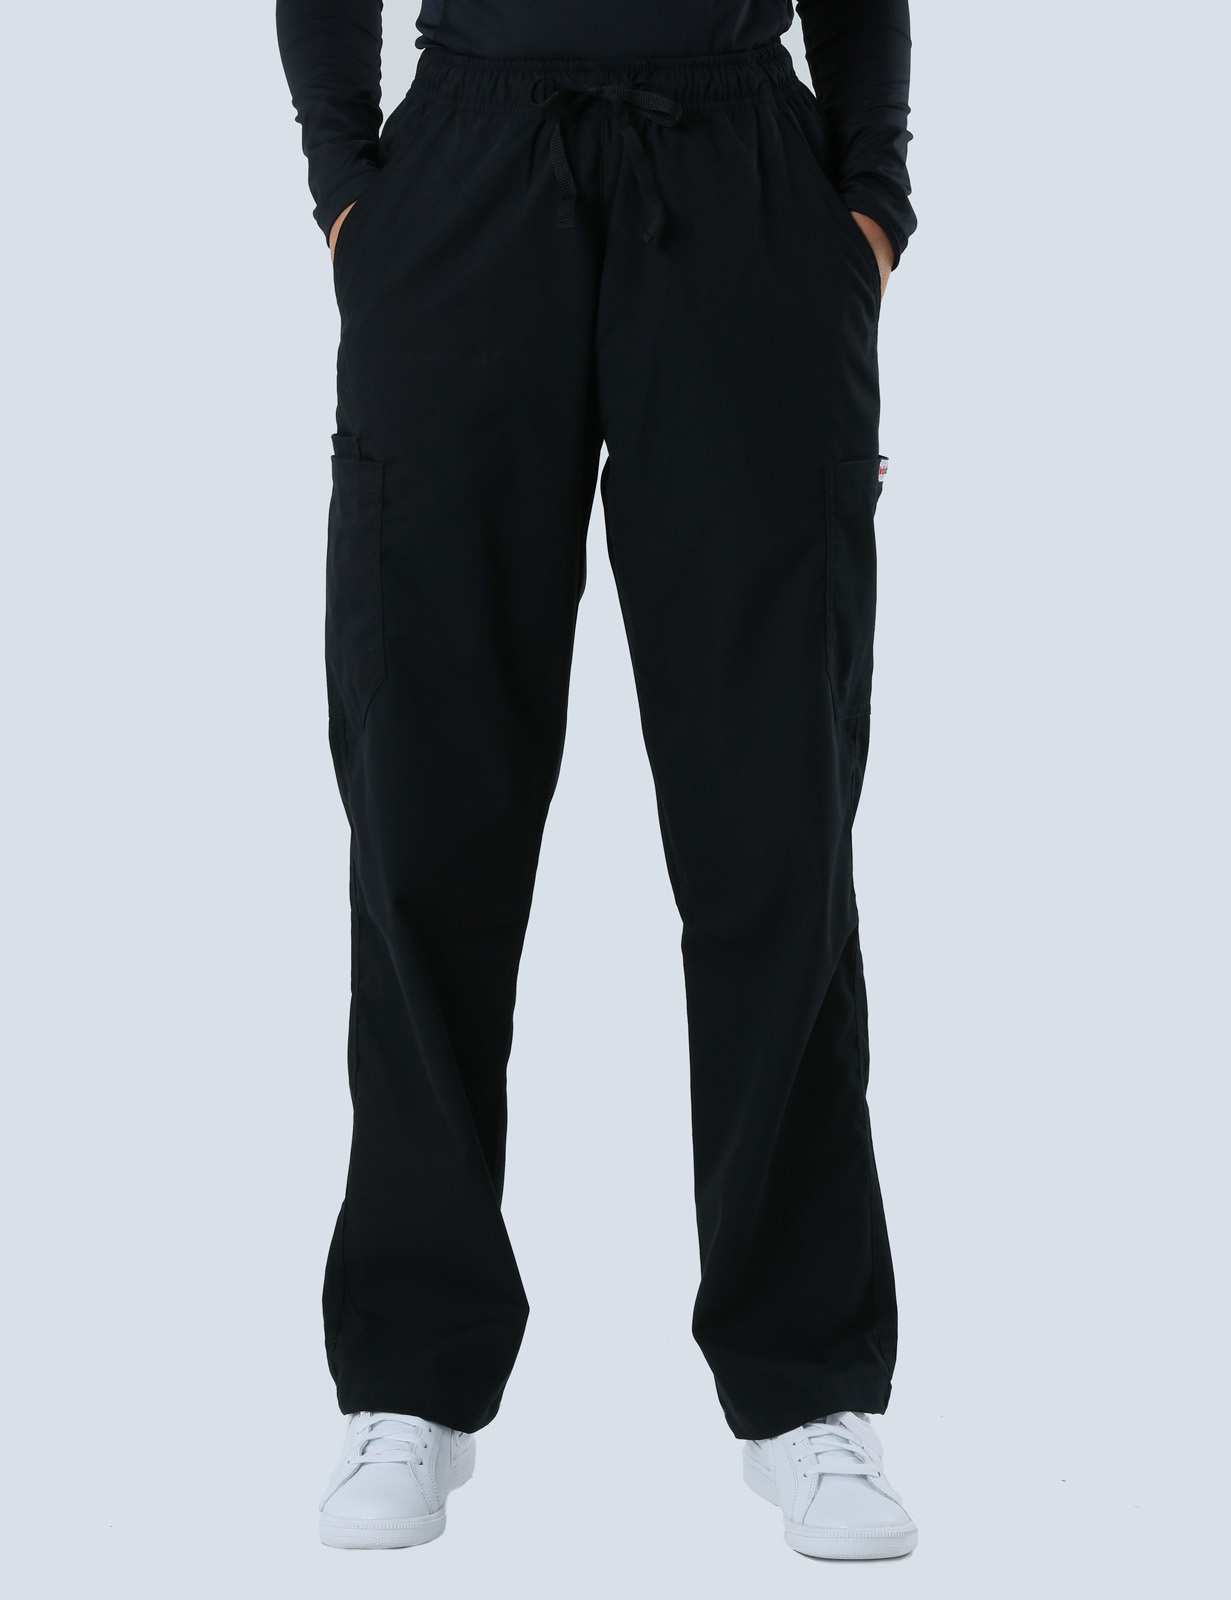 KnG Healthcare - Black Cargo Pant